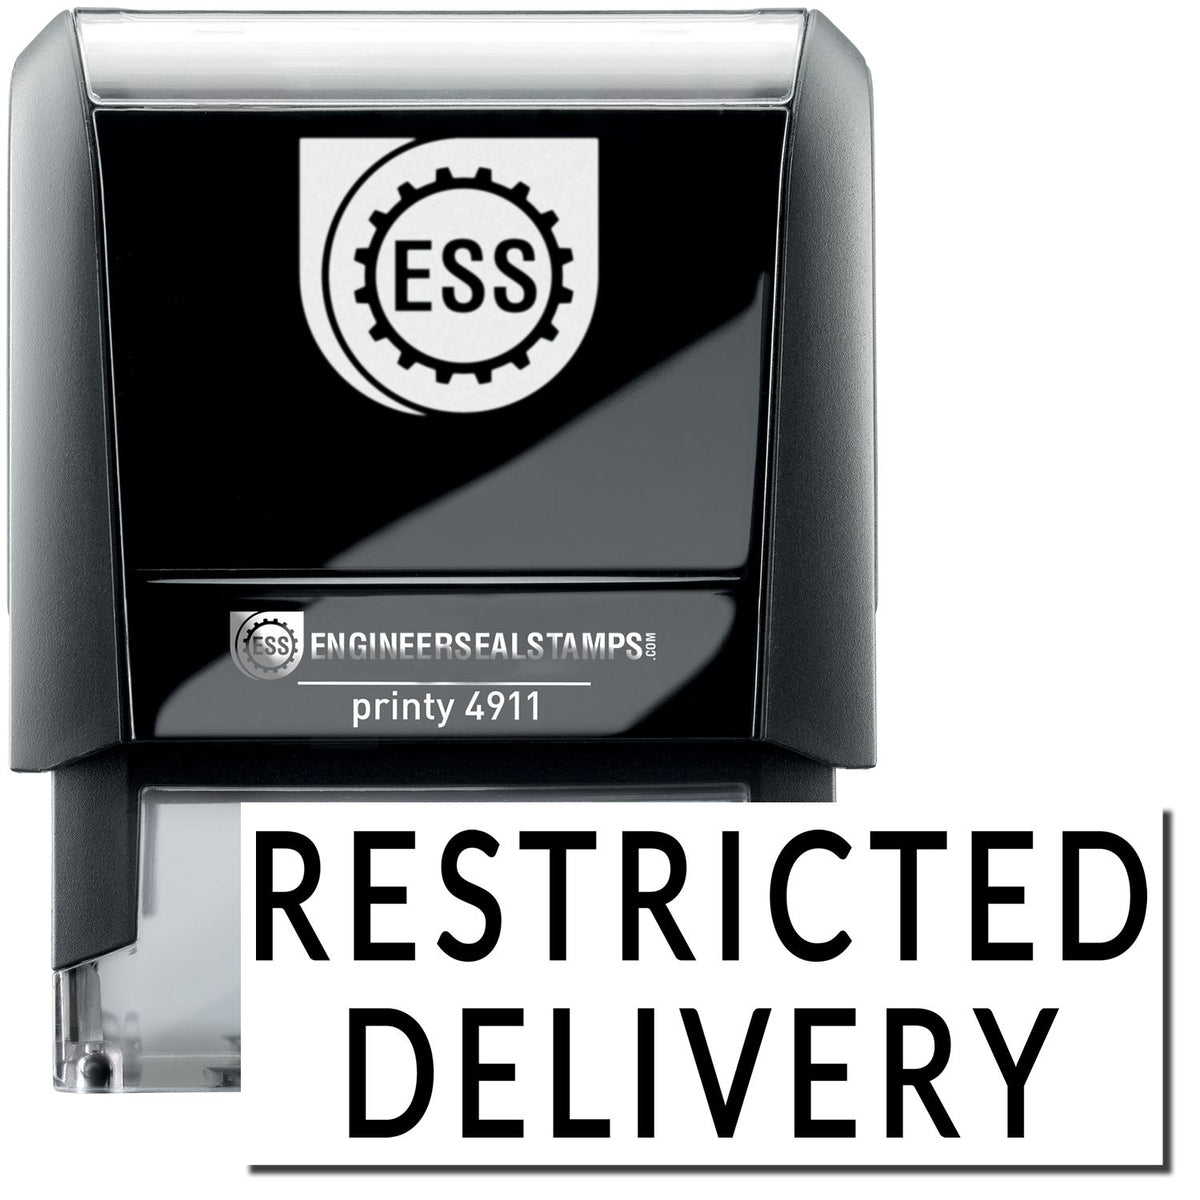 A self-inking stamp with a stamped image showing how the text &quot;RESTRICTED DELIVERY&quot; is displayed after stamping.